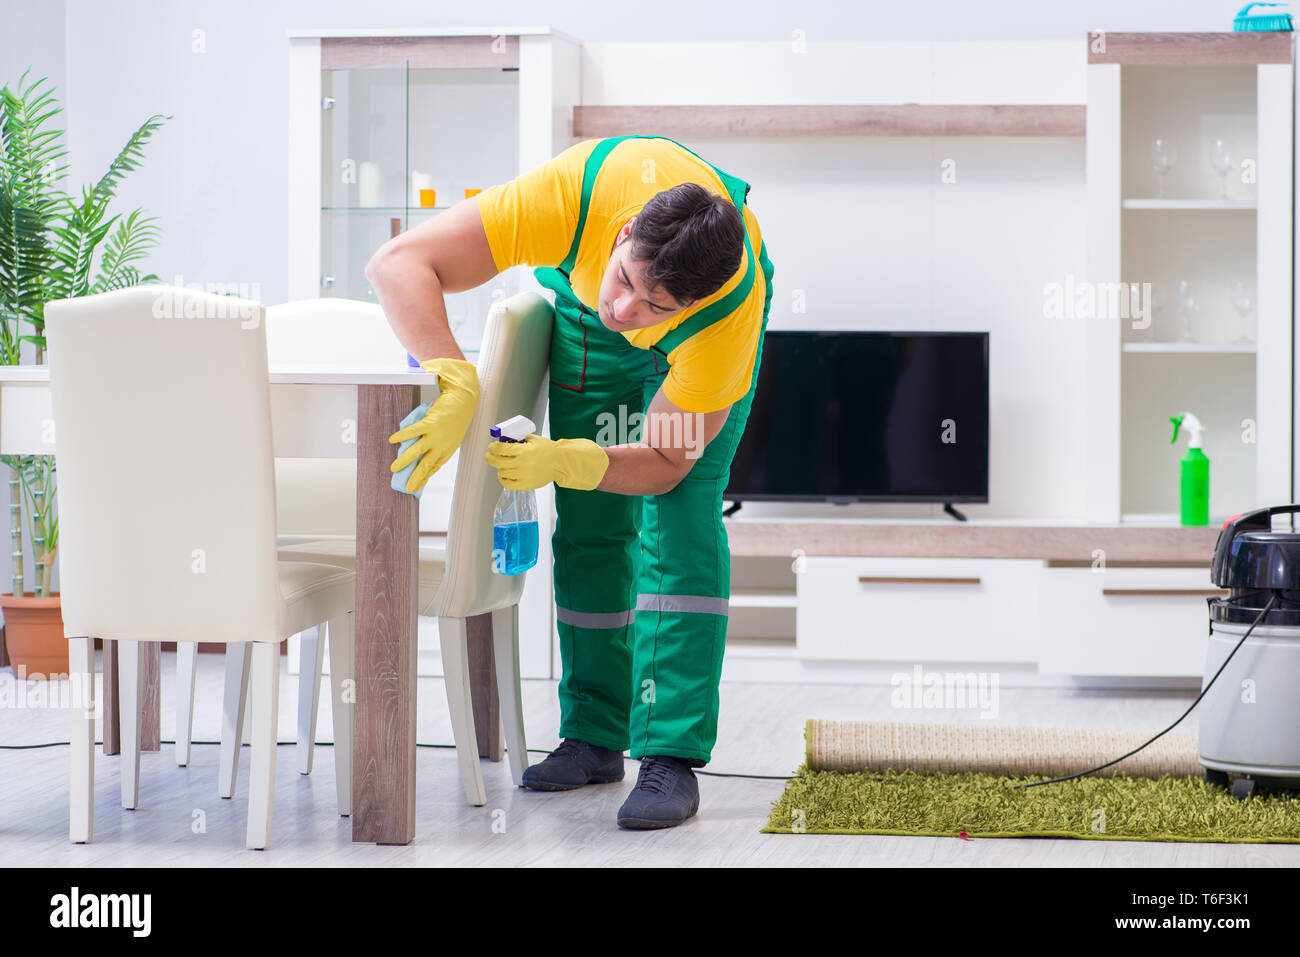 Professional Cleaning Contractor Working At Home Stock Photo